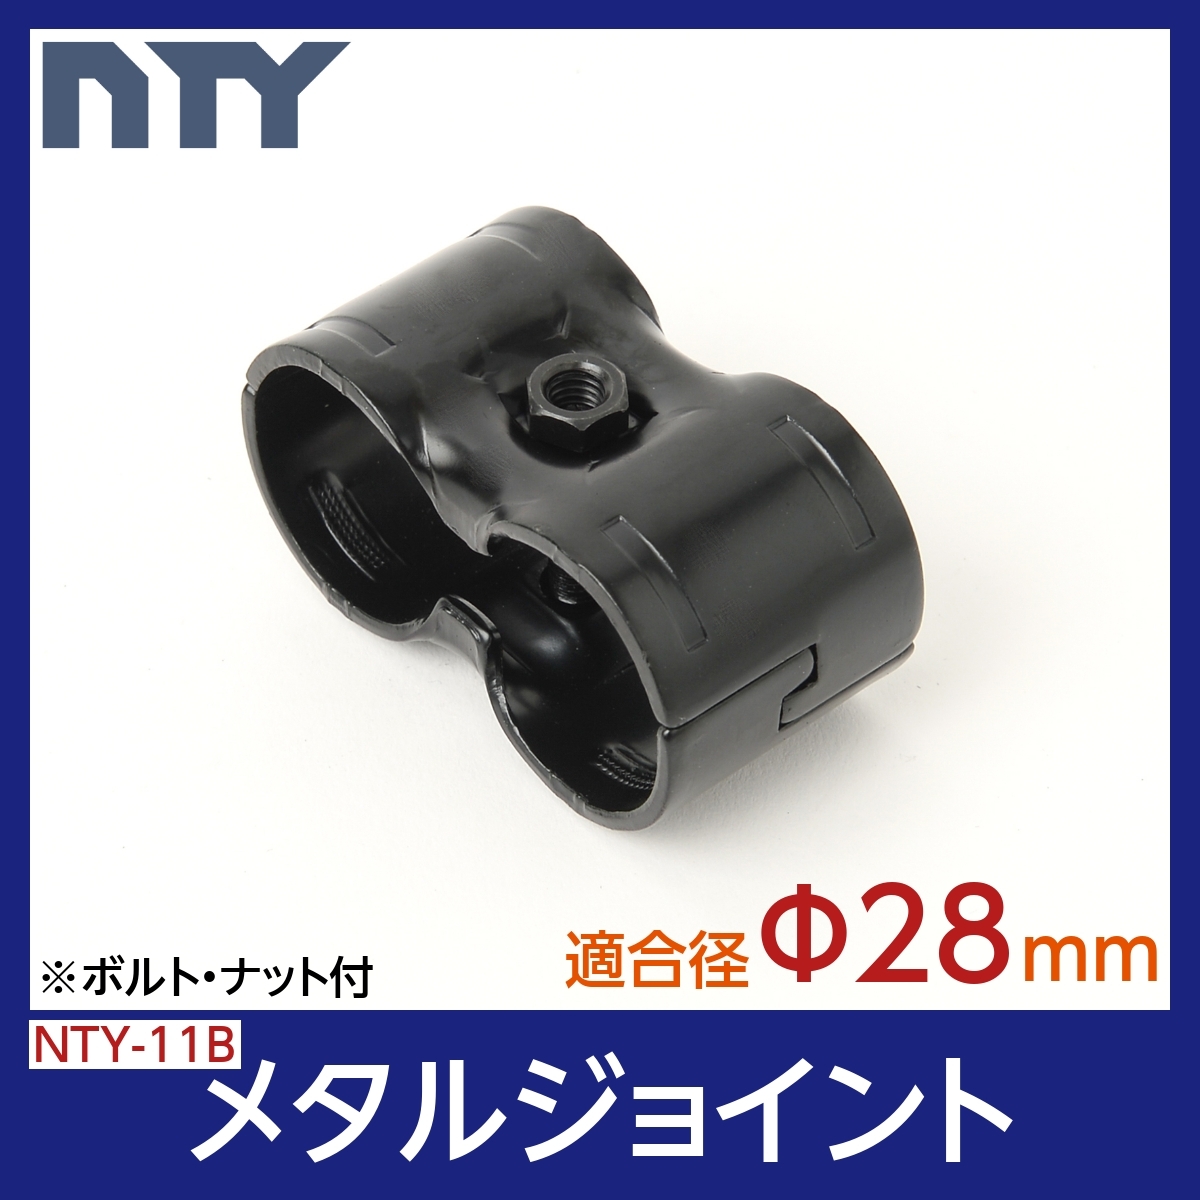 NTY metal joint NTY-11B black Φ28mm for (irekta- metal joint. HJ-11. compatibility equipped ) assembly pipe joint DIY shelves rack 